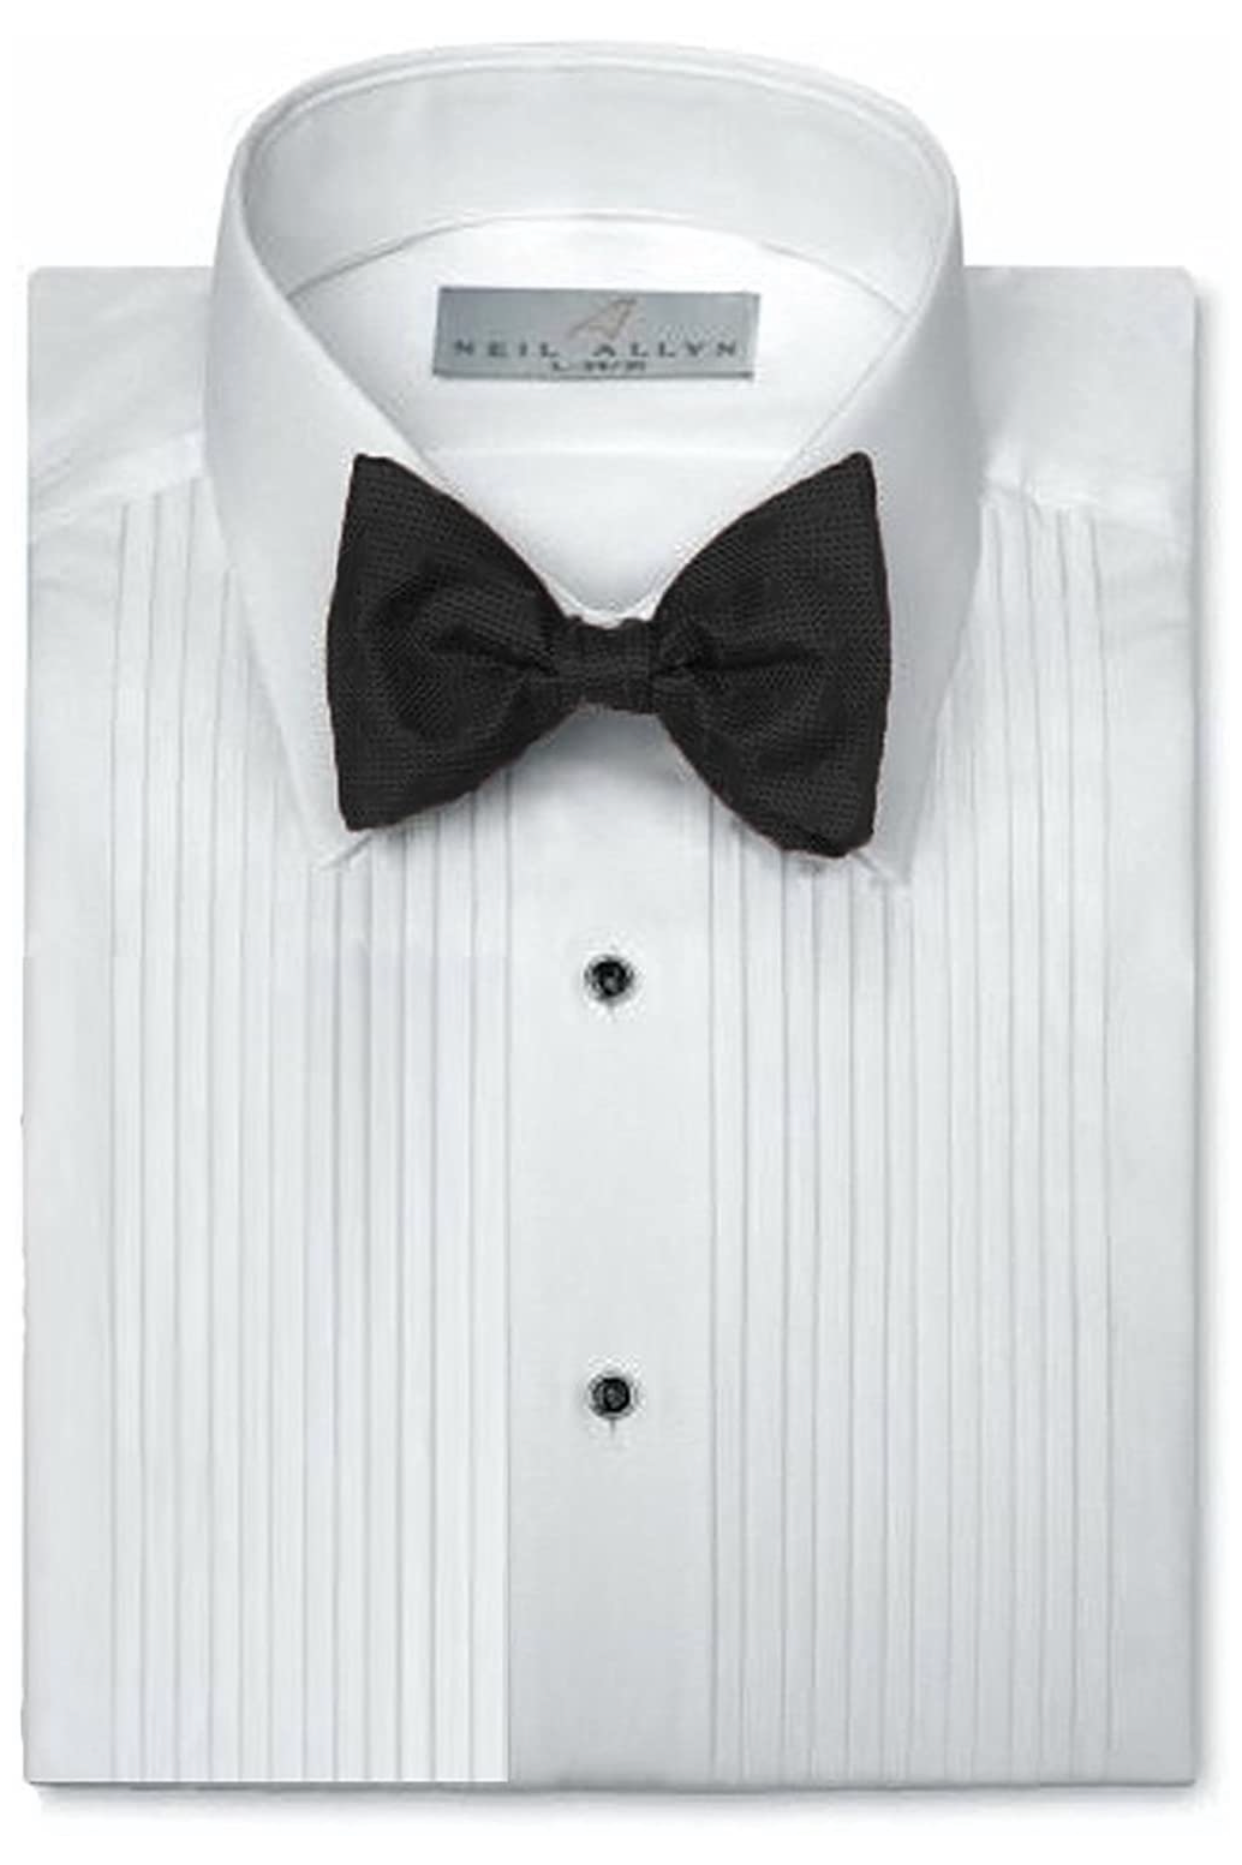 Neil Allyn Slim Fit Laydown Collar Tuxedo Shirt in a Polycotton Blend with 1/4" Pleats and Barrel Cuffs